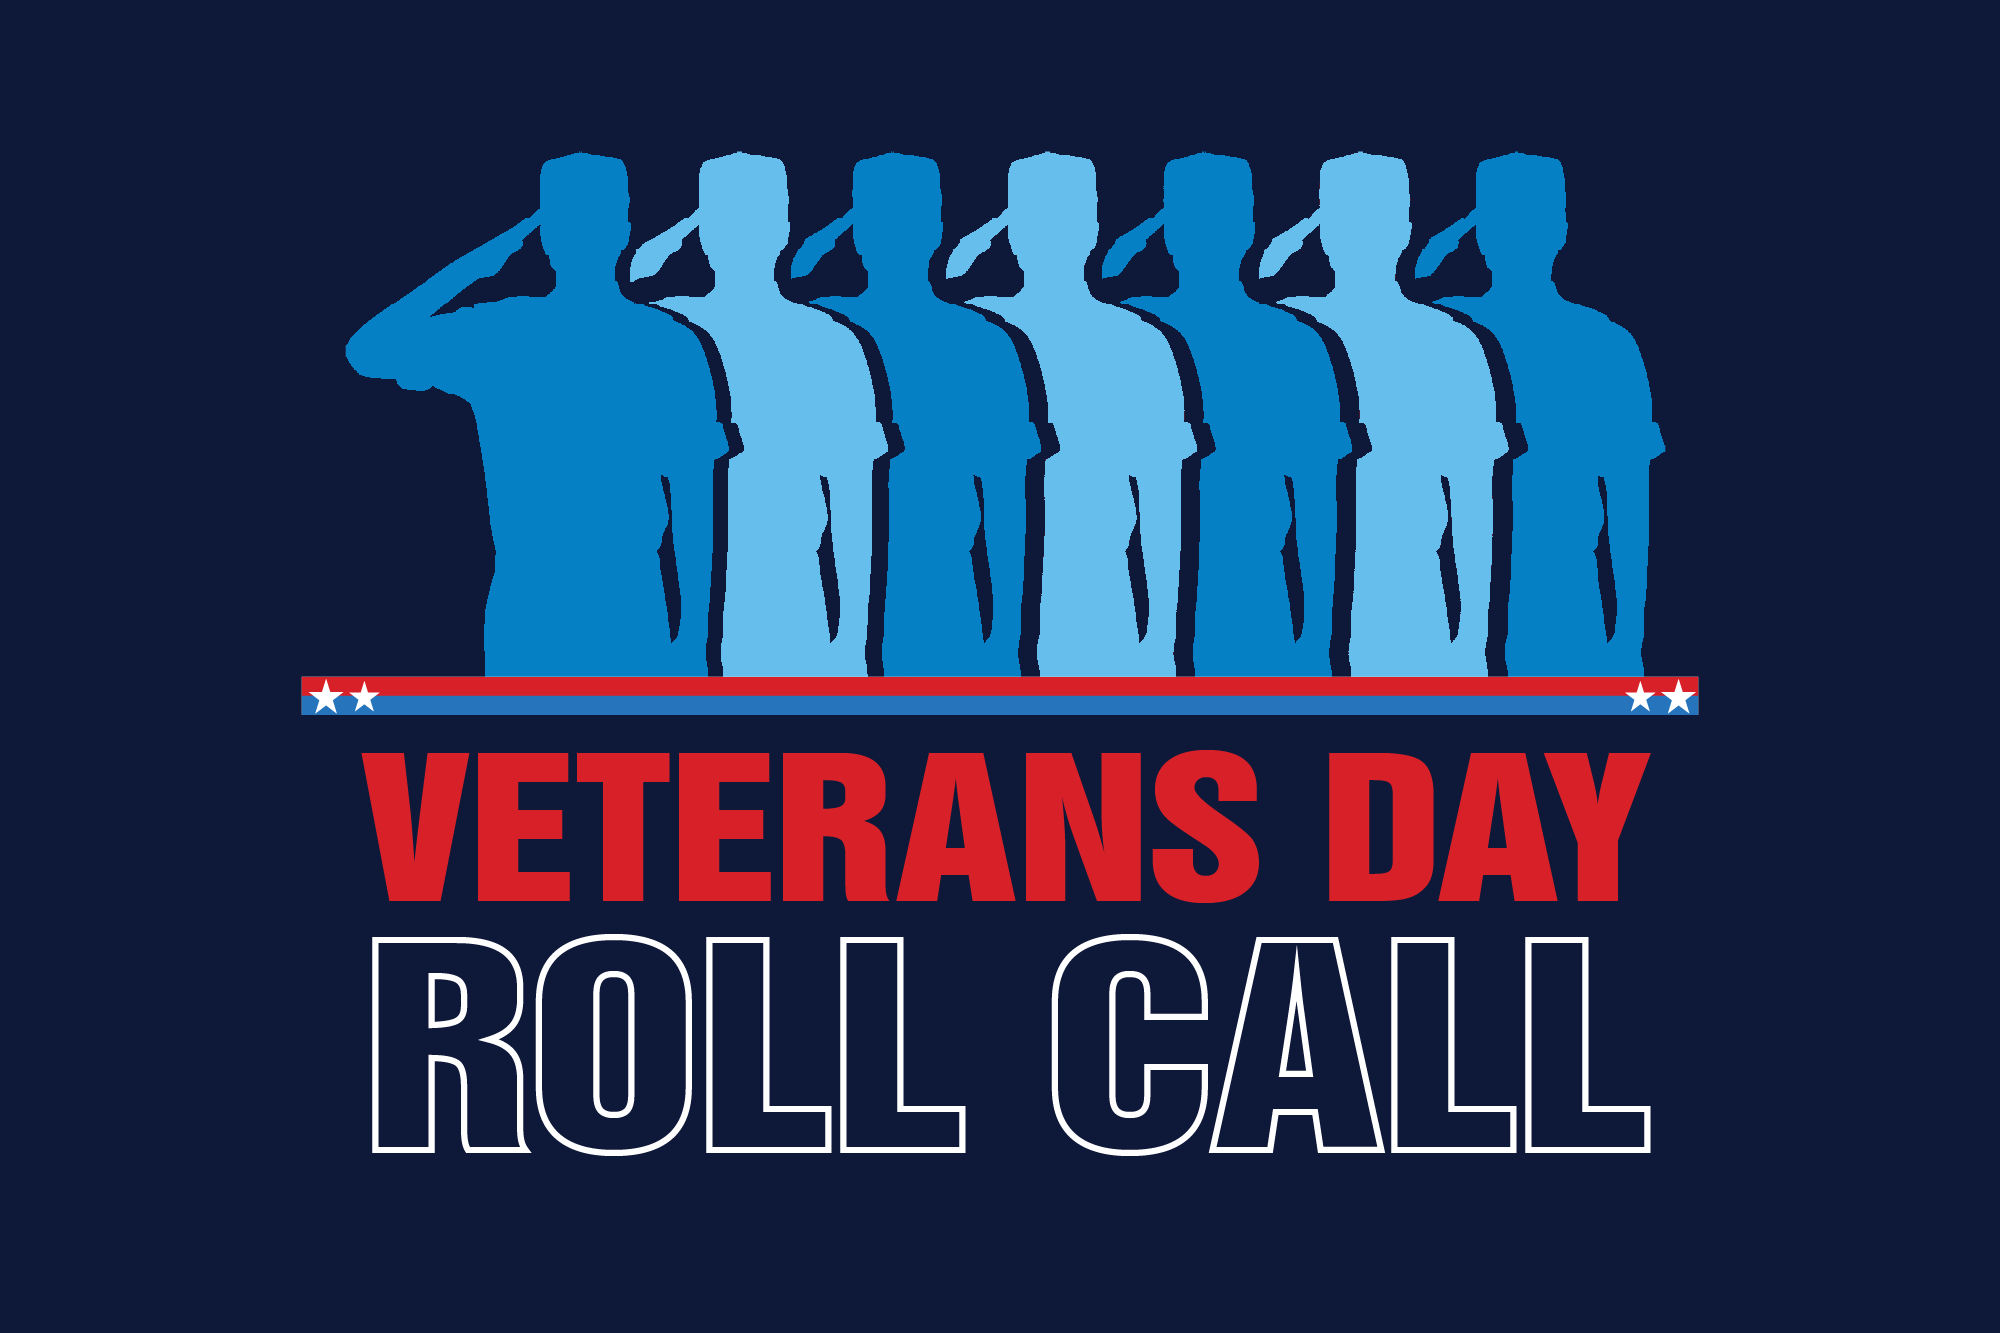 Graphic of soldiers with the words "Veterans Day Roll Call."